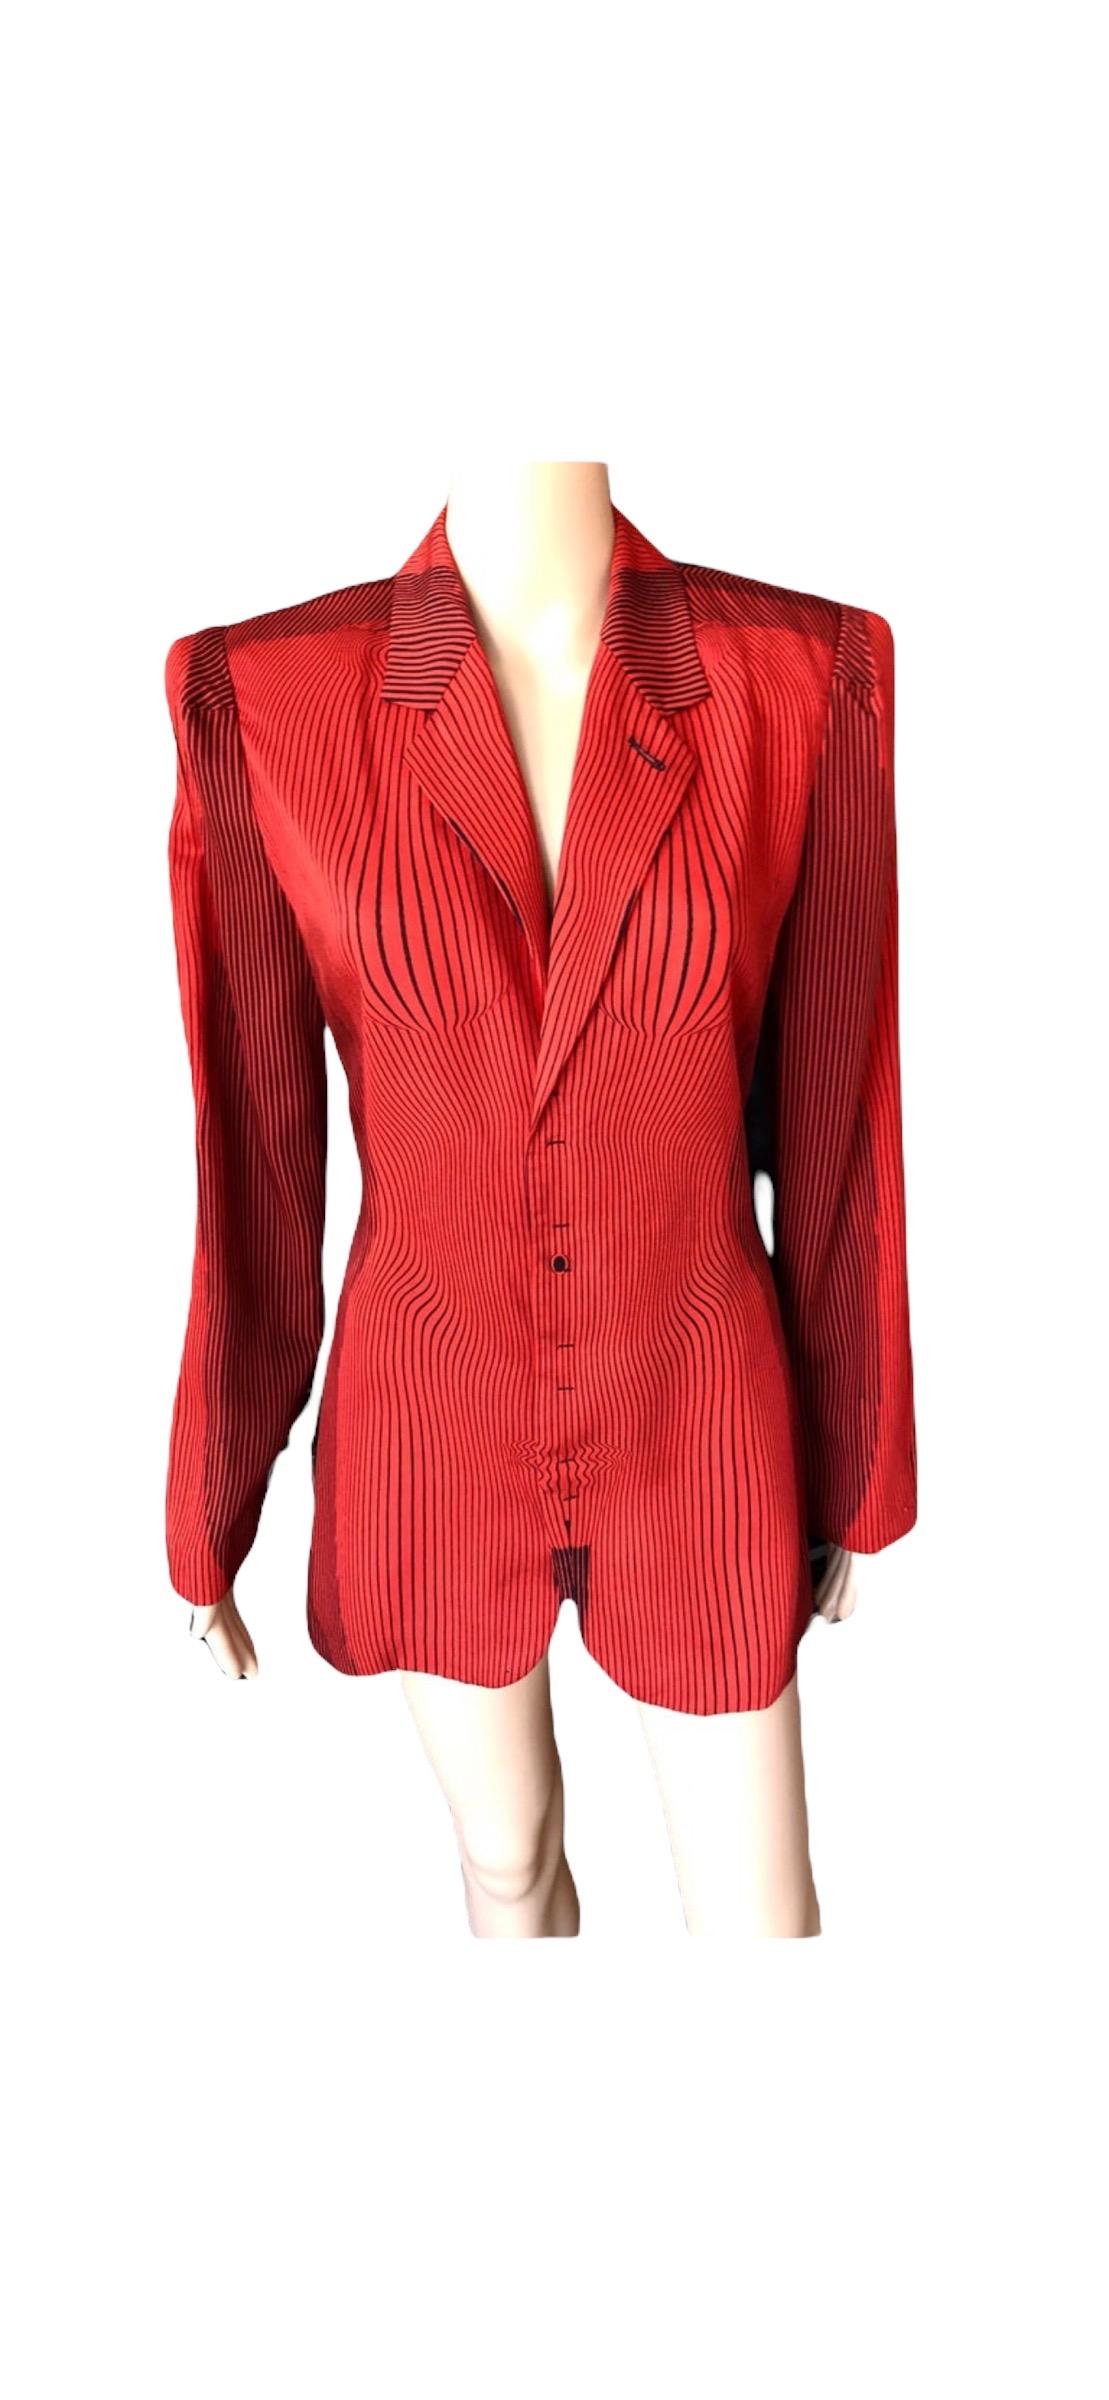 Jean Paul Gaultier S/S 1996 Vintage Cyberbaba Optical Illusion Jacket Blazer Top For Sale 8